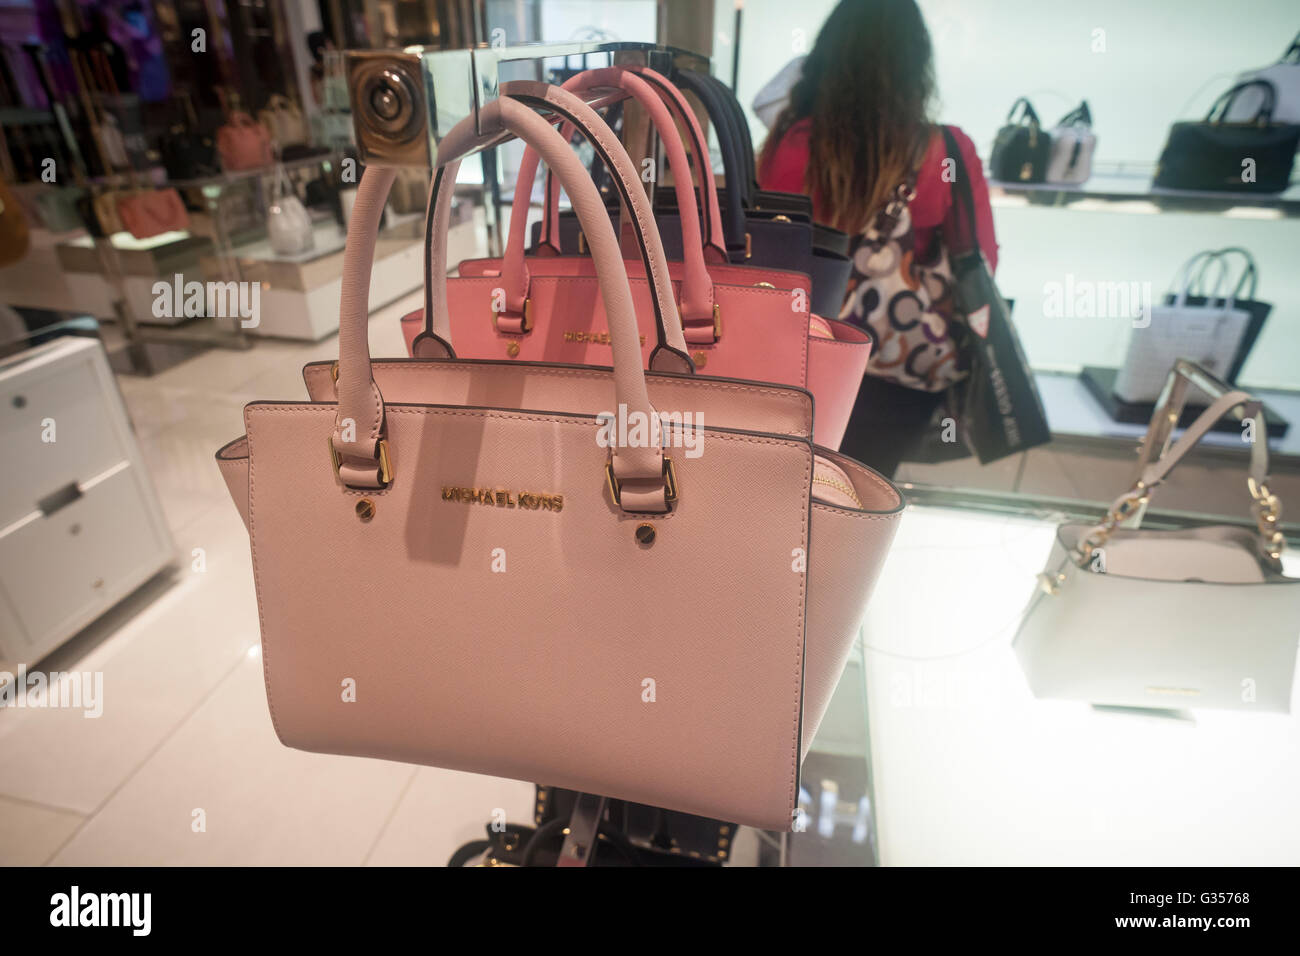 Handbags on display at the Michael Kors boutique within Macy's in New York  on Tuesday, August 4, 2015. First-quarter sales and profits for Michael  Kors handbag designer beat analysts' expectations, albeit low